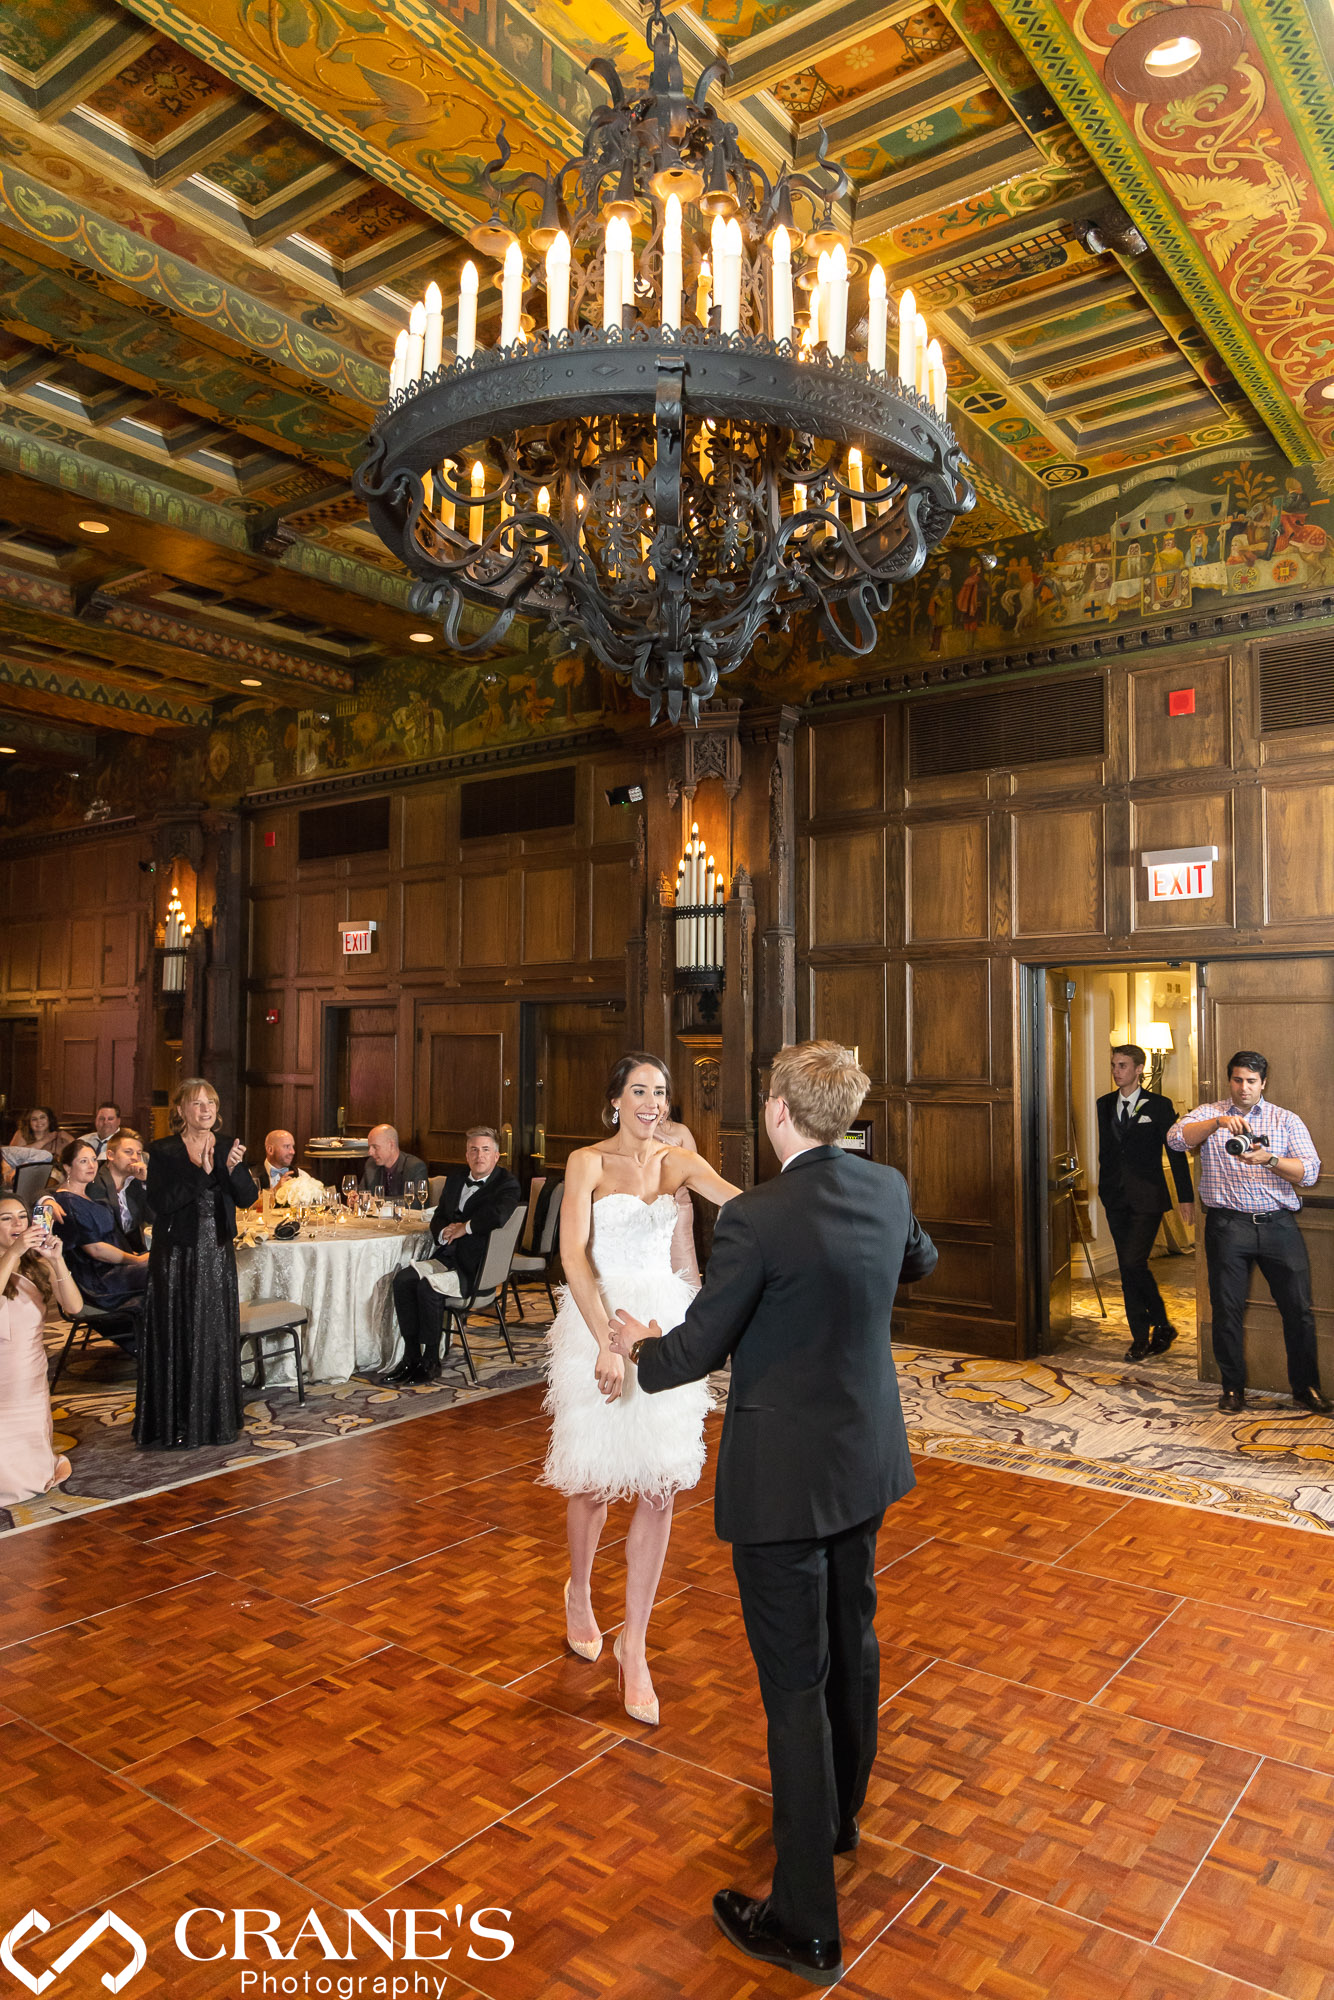 Newlyweds' first dance at King Arthur Court at InterContinental